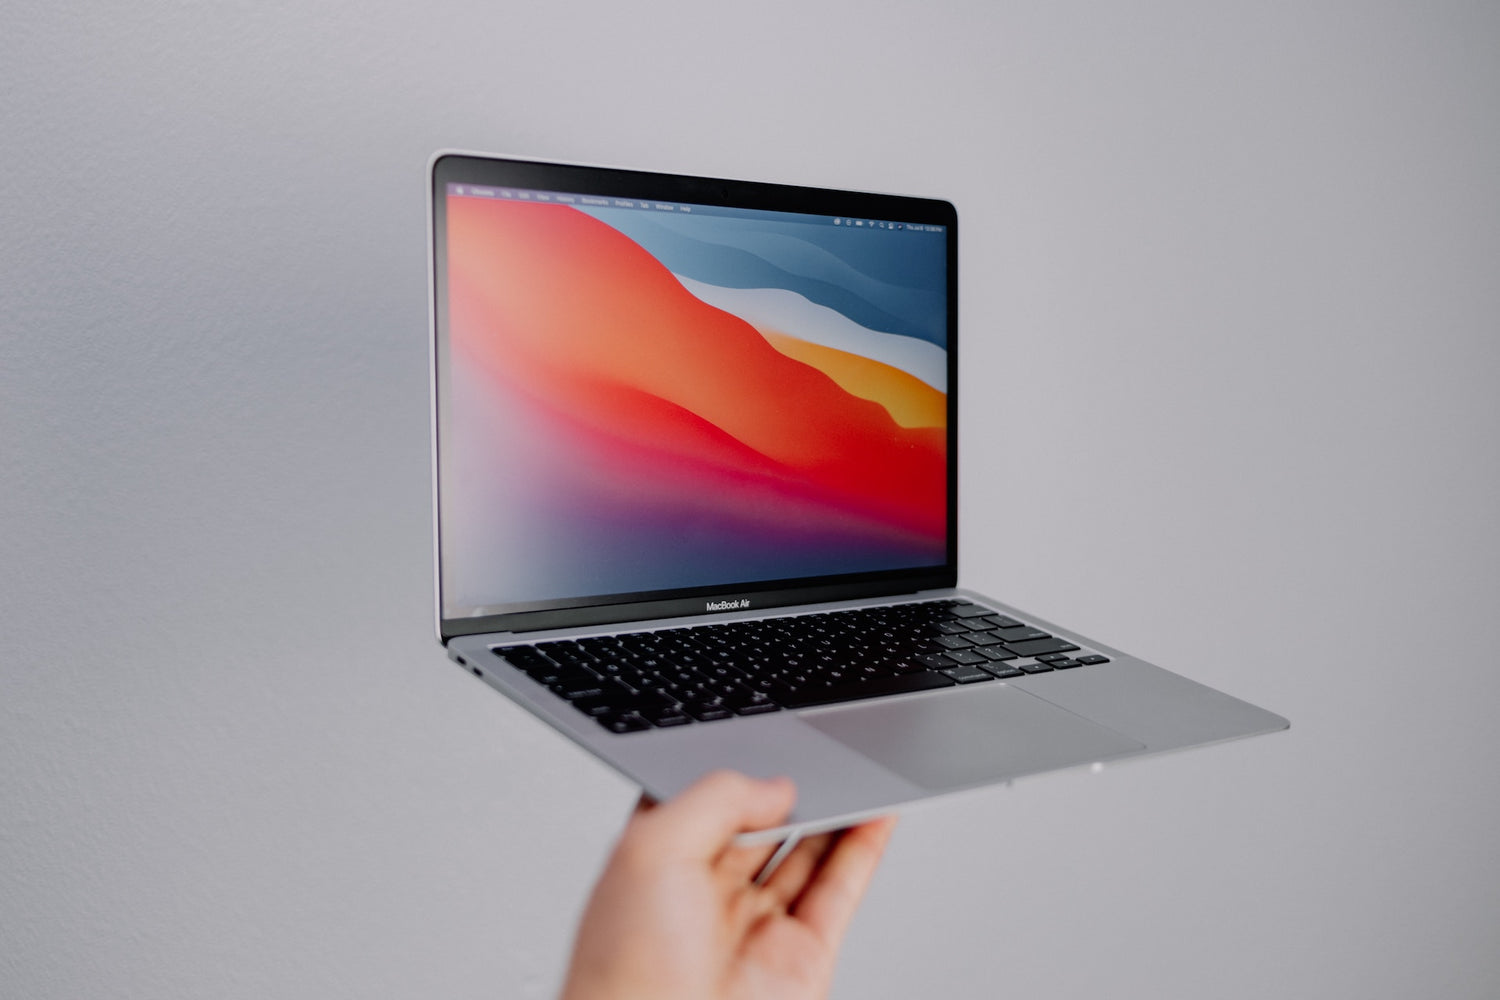 Is it safe to buy a refurbished MacBook Air?